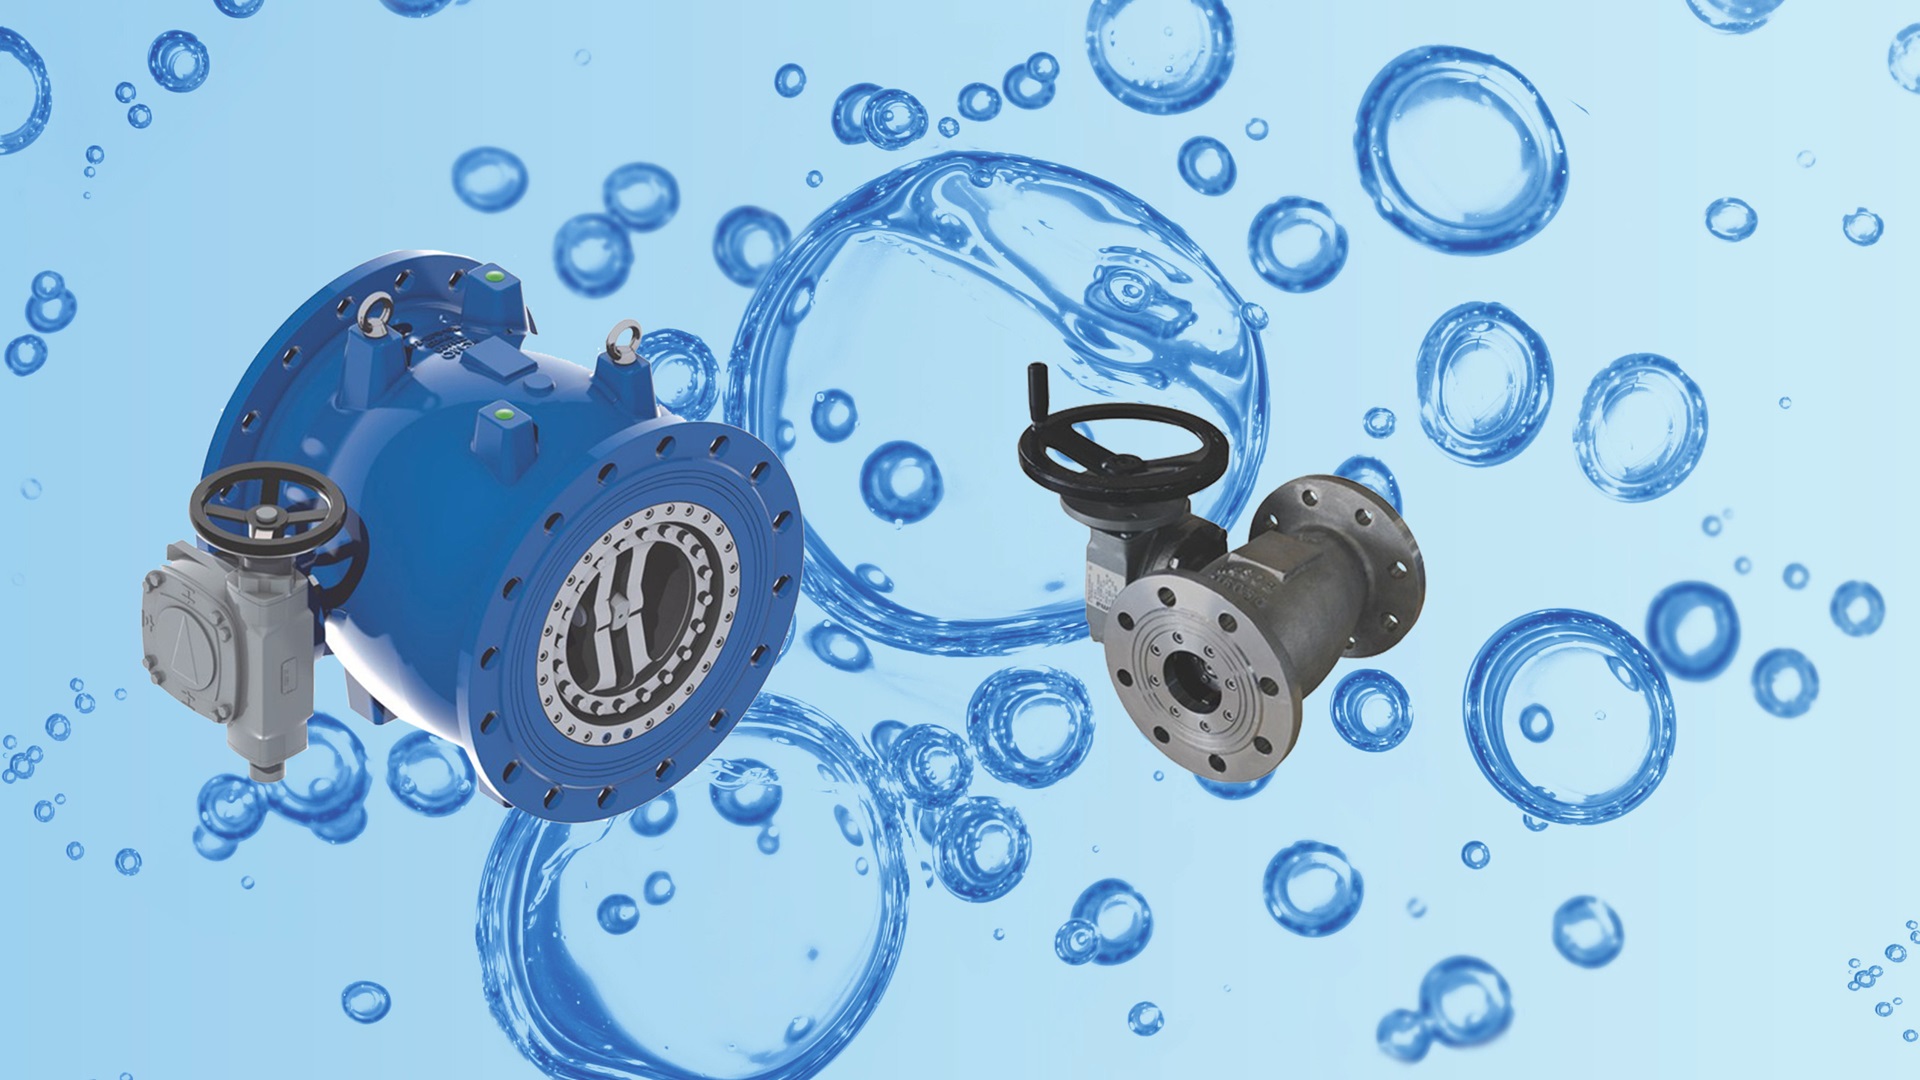 Introducing our range of needle valves